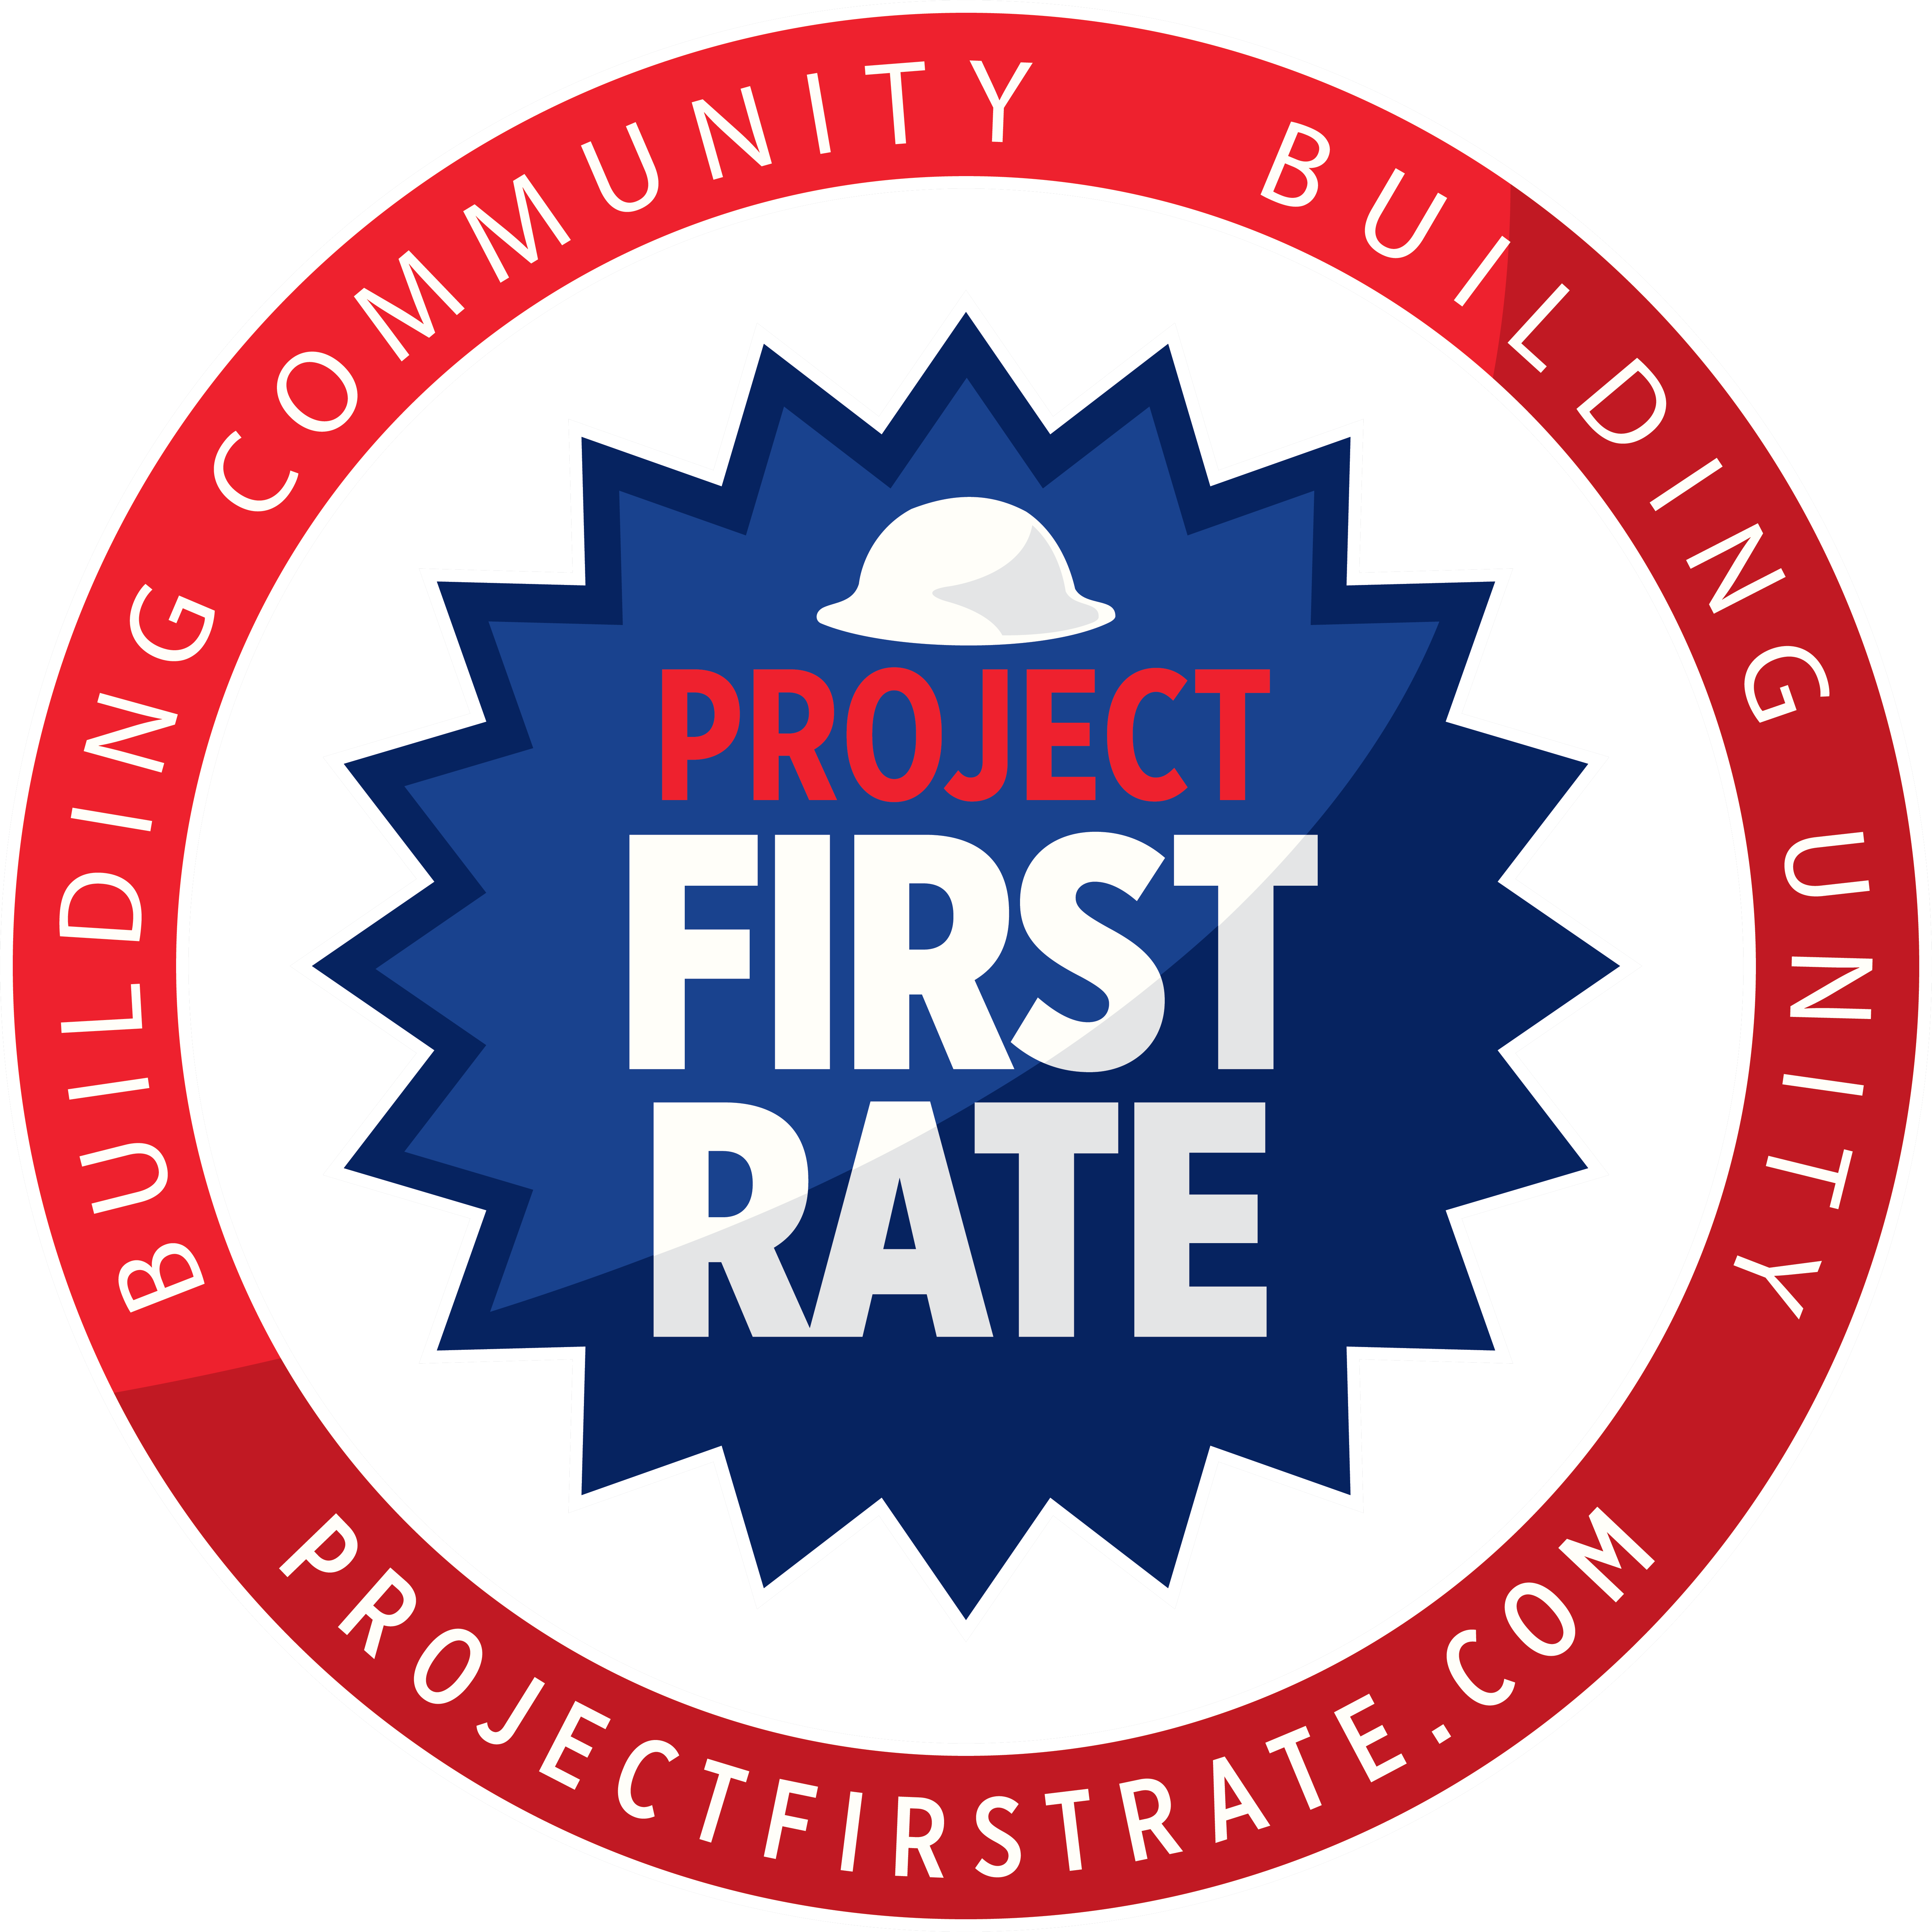 Project First Rate logo